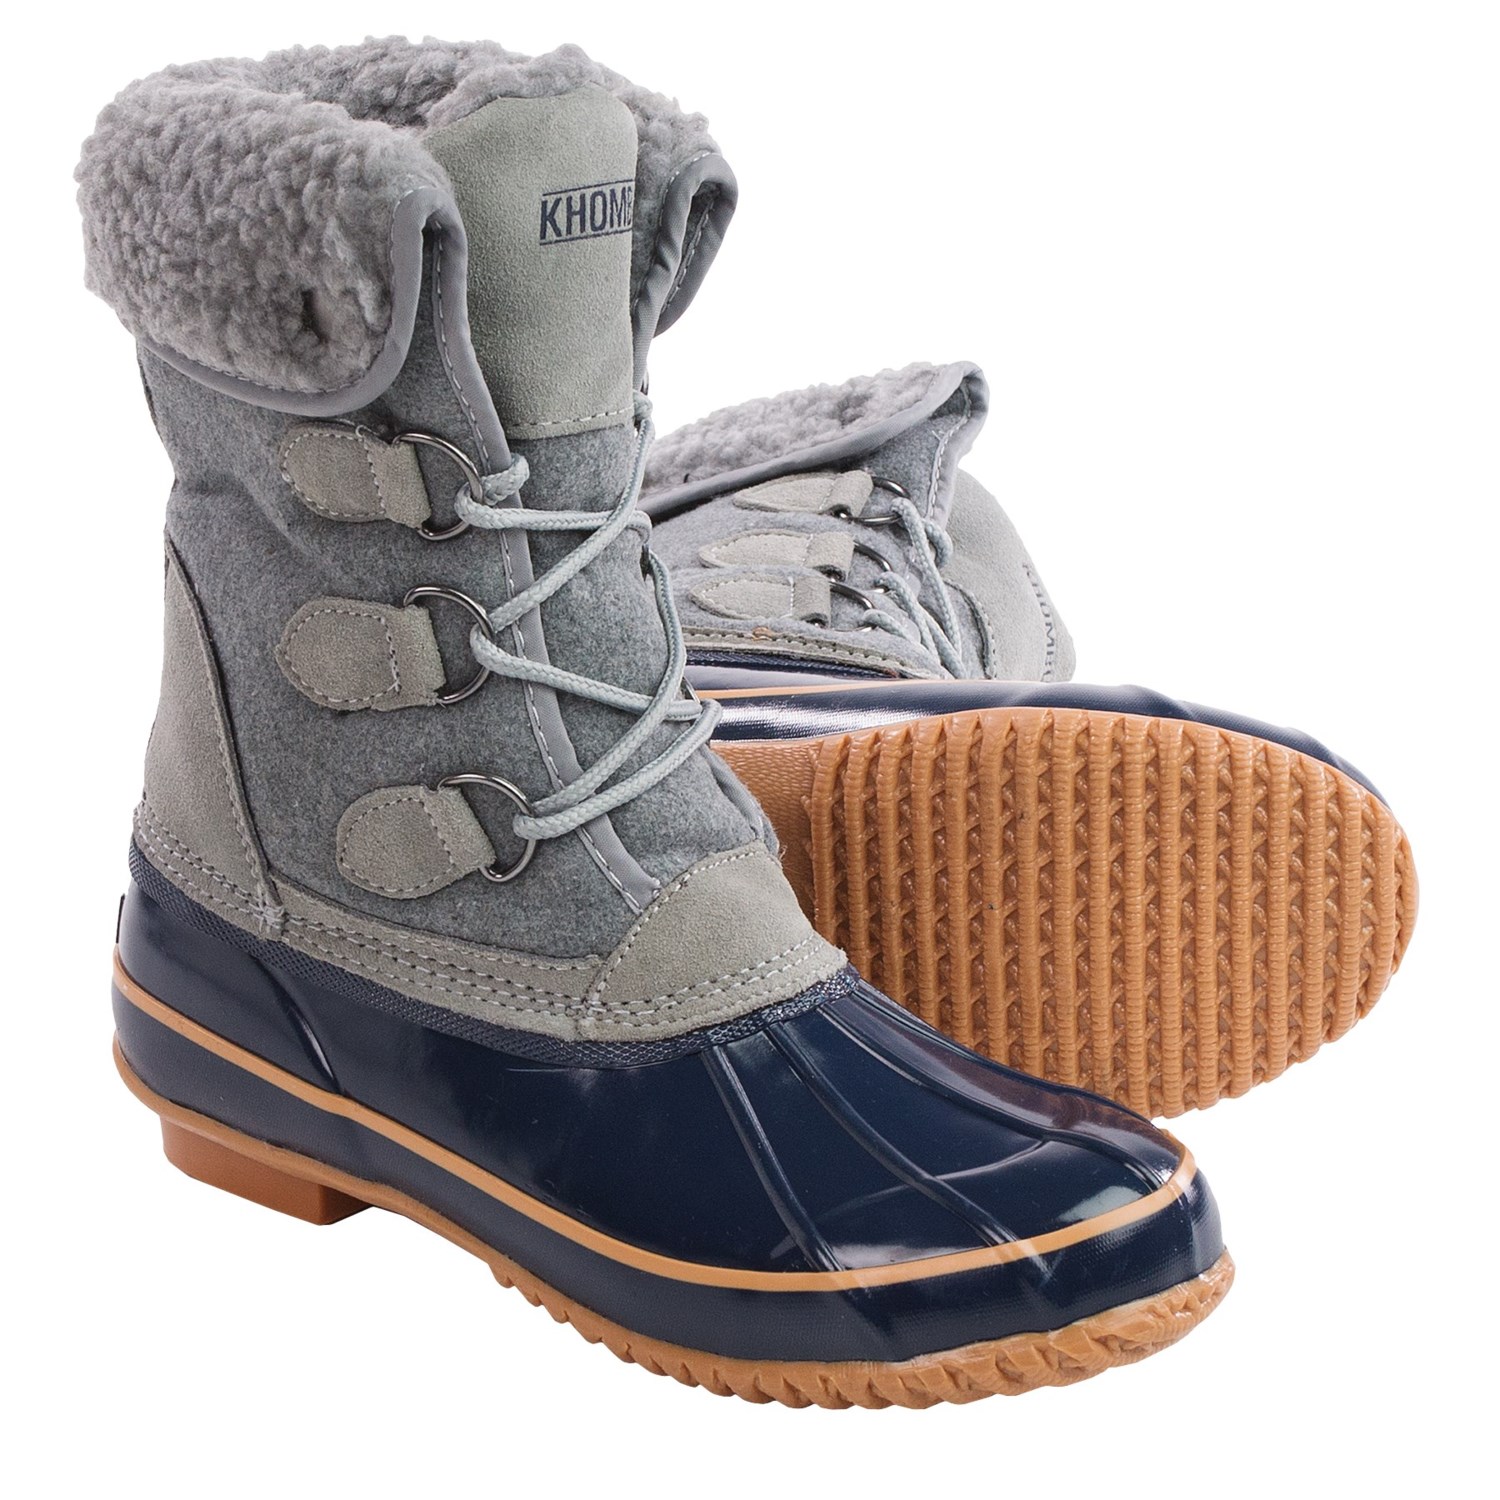 Best Waterproof Insulated Women's Winter Boots | Division ...